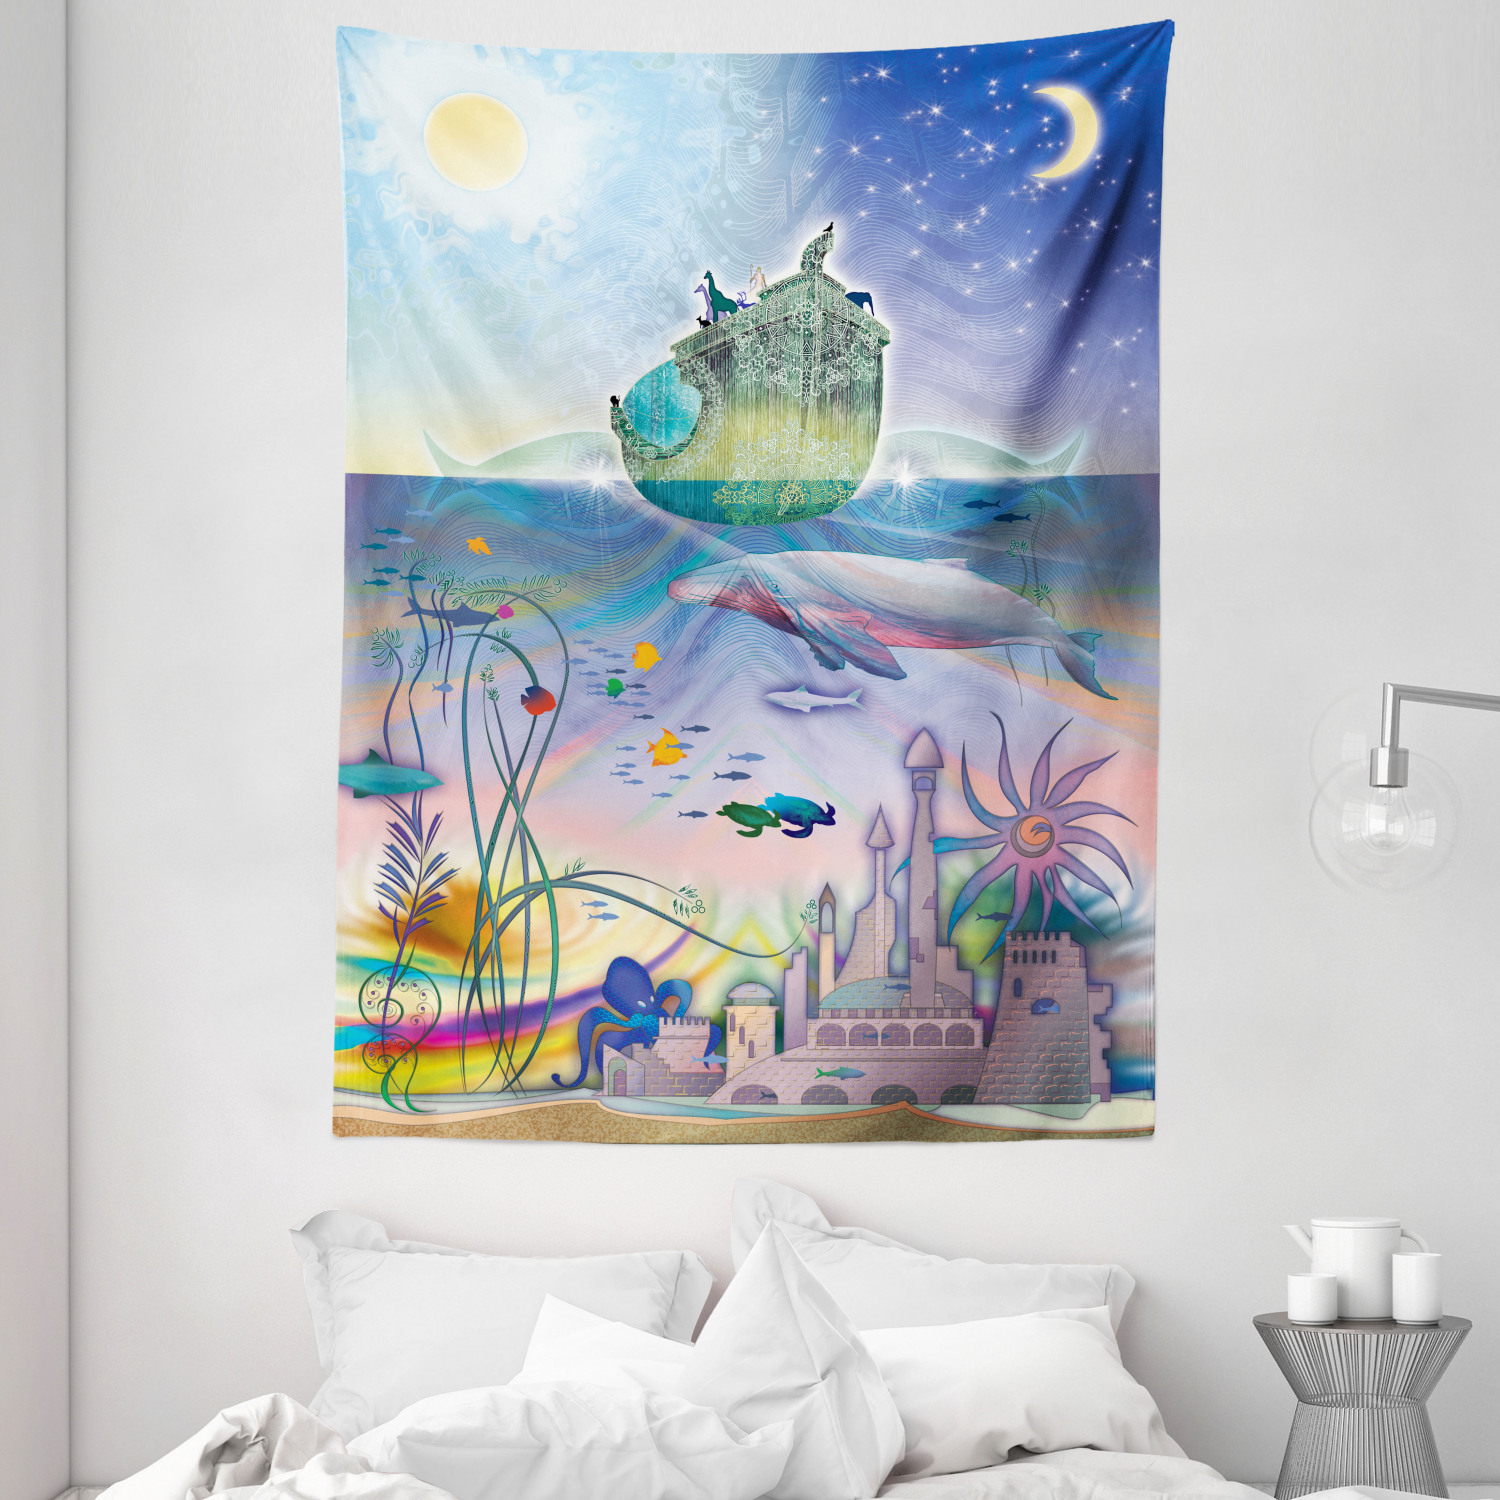 Coral Tapestry Wall Hanging Art Bedroom Dorm 2 Sizes Available Ambesonne